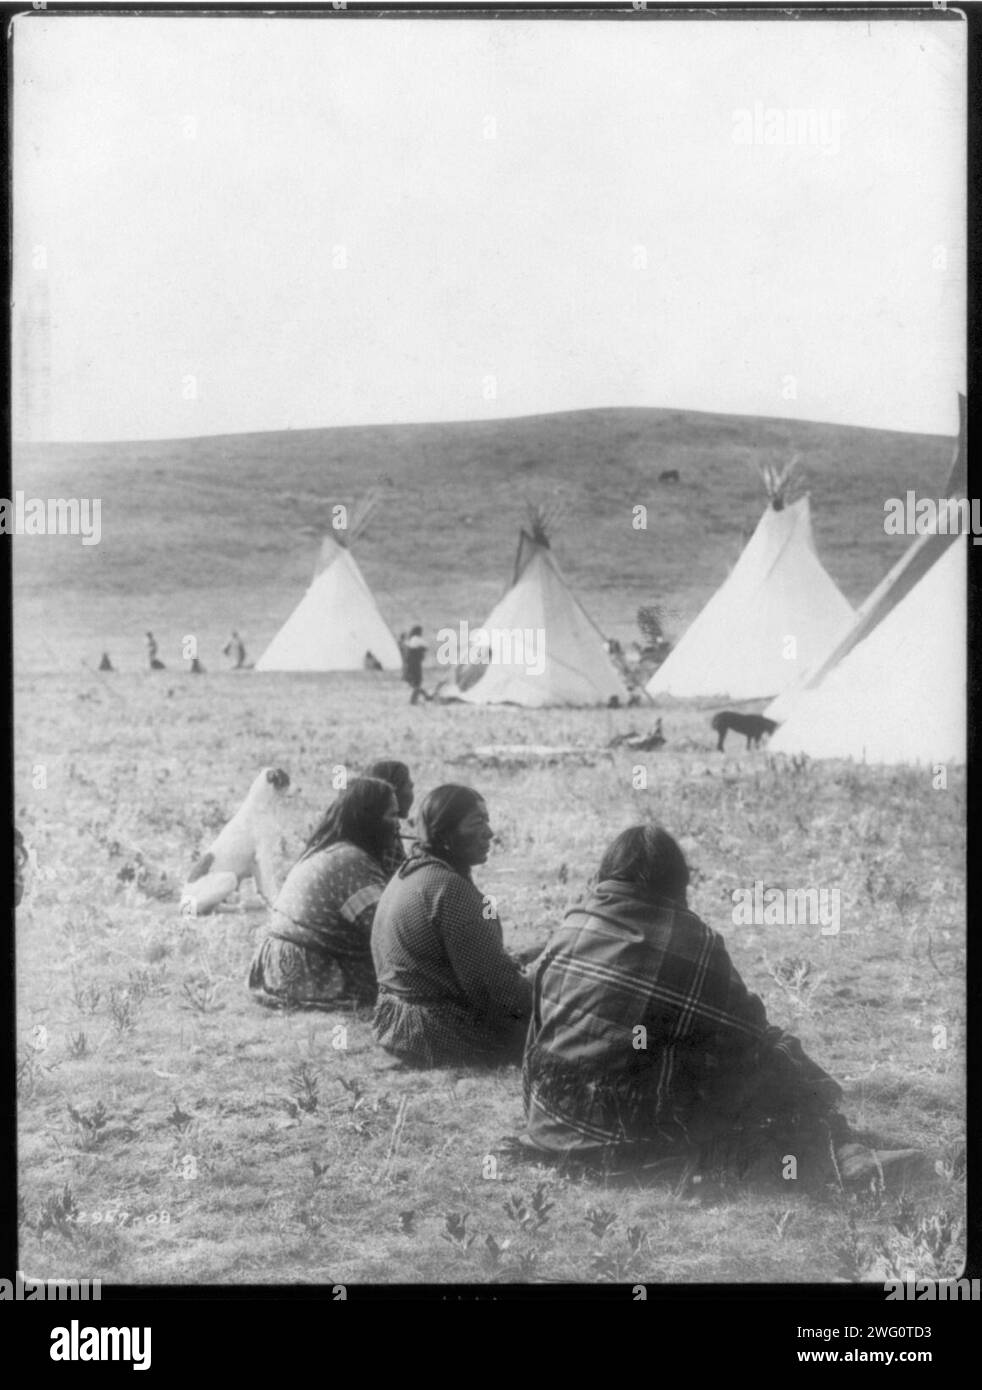 Camp gossips-Atsina, c1908. Four Atsina women and a dog, their backs to camera, sitting some distance from tipis and others. Stock Photo